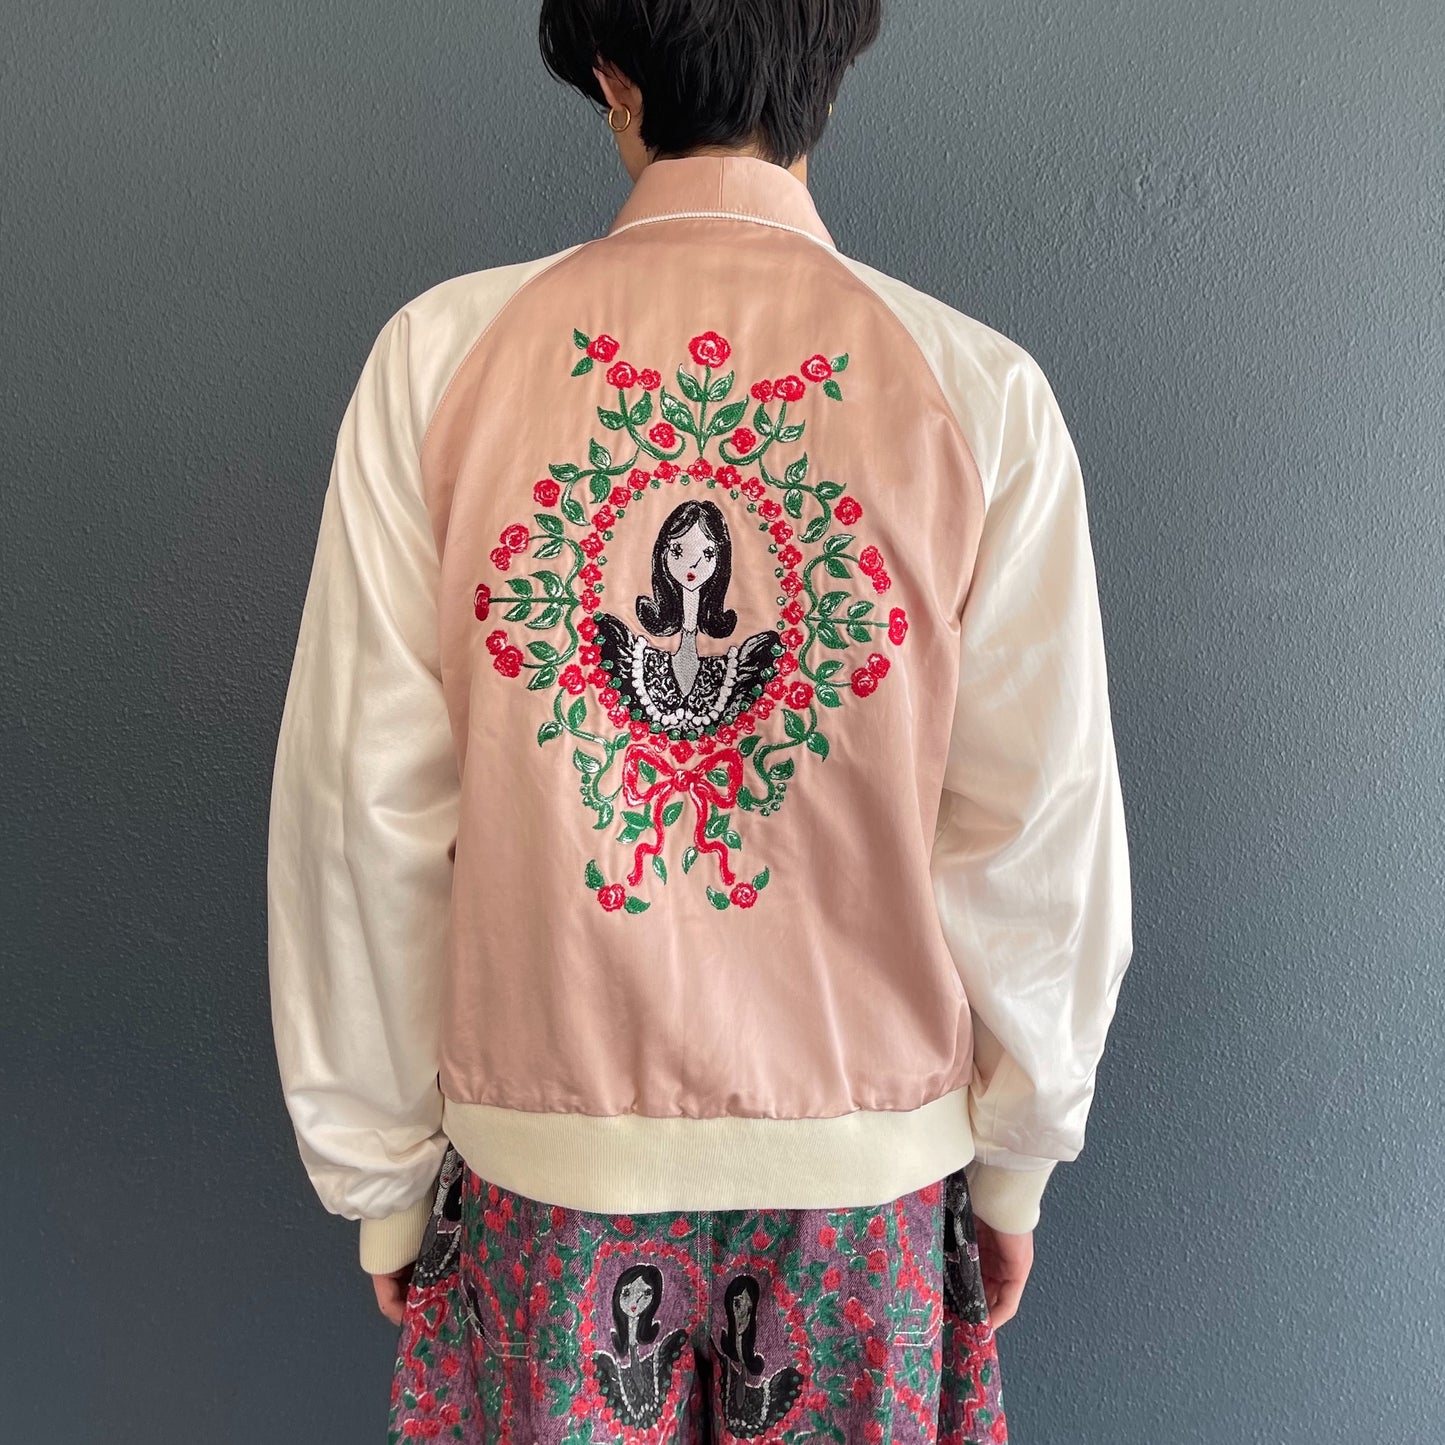 BOWTIE SOUVENIR JACKET ROSE & GIRL EMBROIDERY / PINK / ボウタイ刺繍ブルゾン